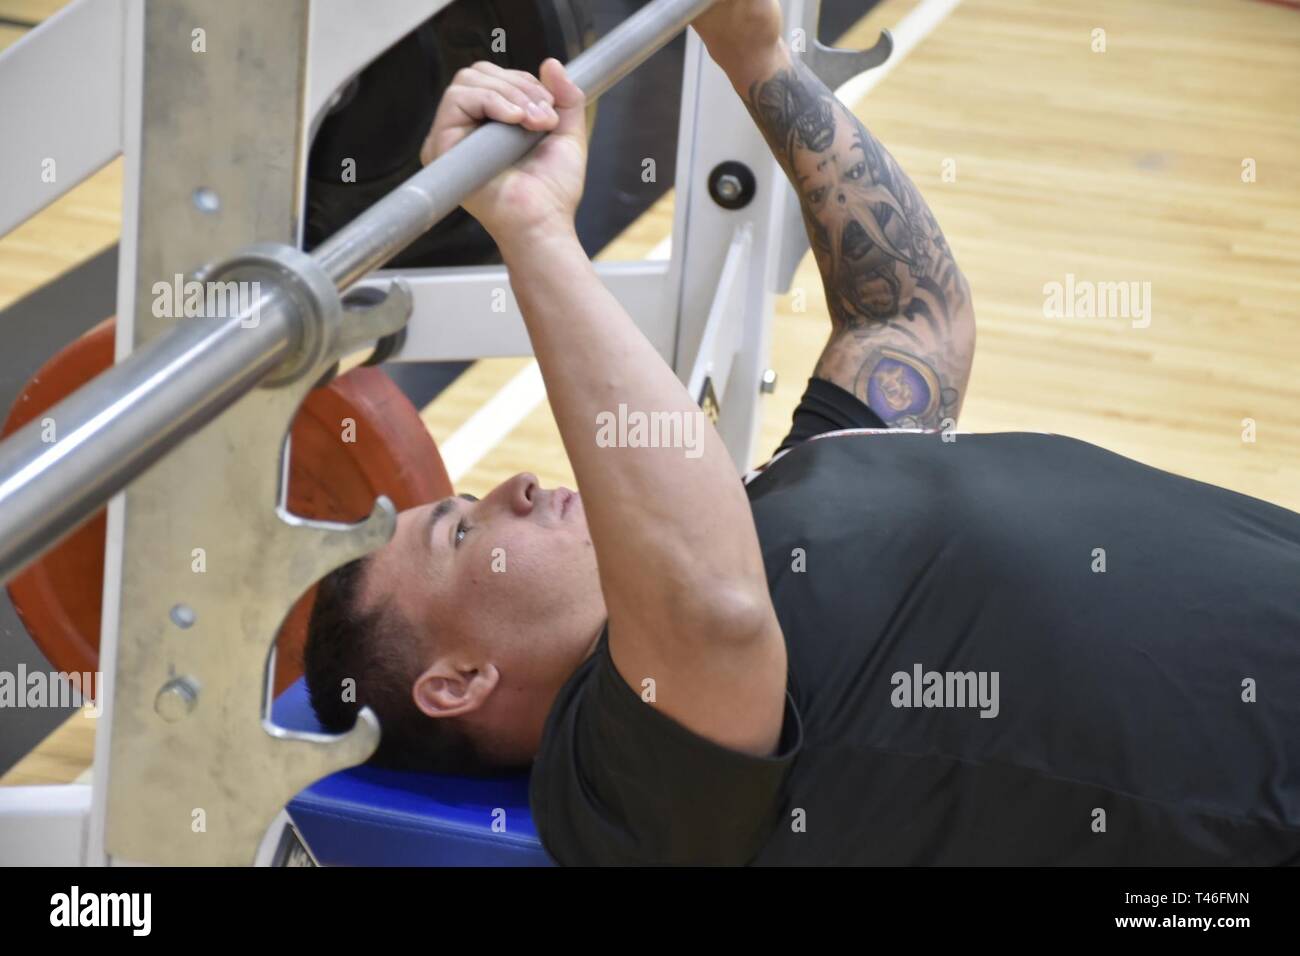 Capt. David Espinoza competes in the powerlifting competition during the 2019 Army Trials at Fort Bliss, Texas, Mar. 8. The 2019 Army Trials at Fort Bliss, Texas is an adaptive sports competition from Mar. 5-16 with over 100 wounded, ill and injured active-duty Soldiers and veterans competing in 14 different sports for the opportunity to represent Team Army at the 2019 Department of Defense Warrior Games in Tampa, Florida. Stock Photo